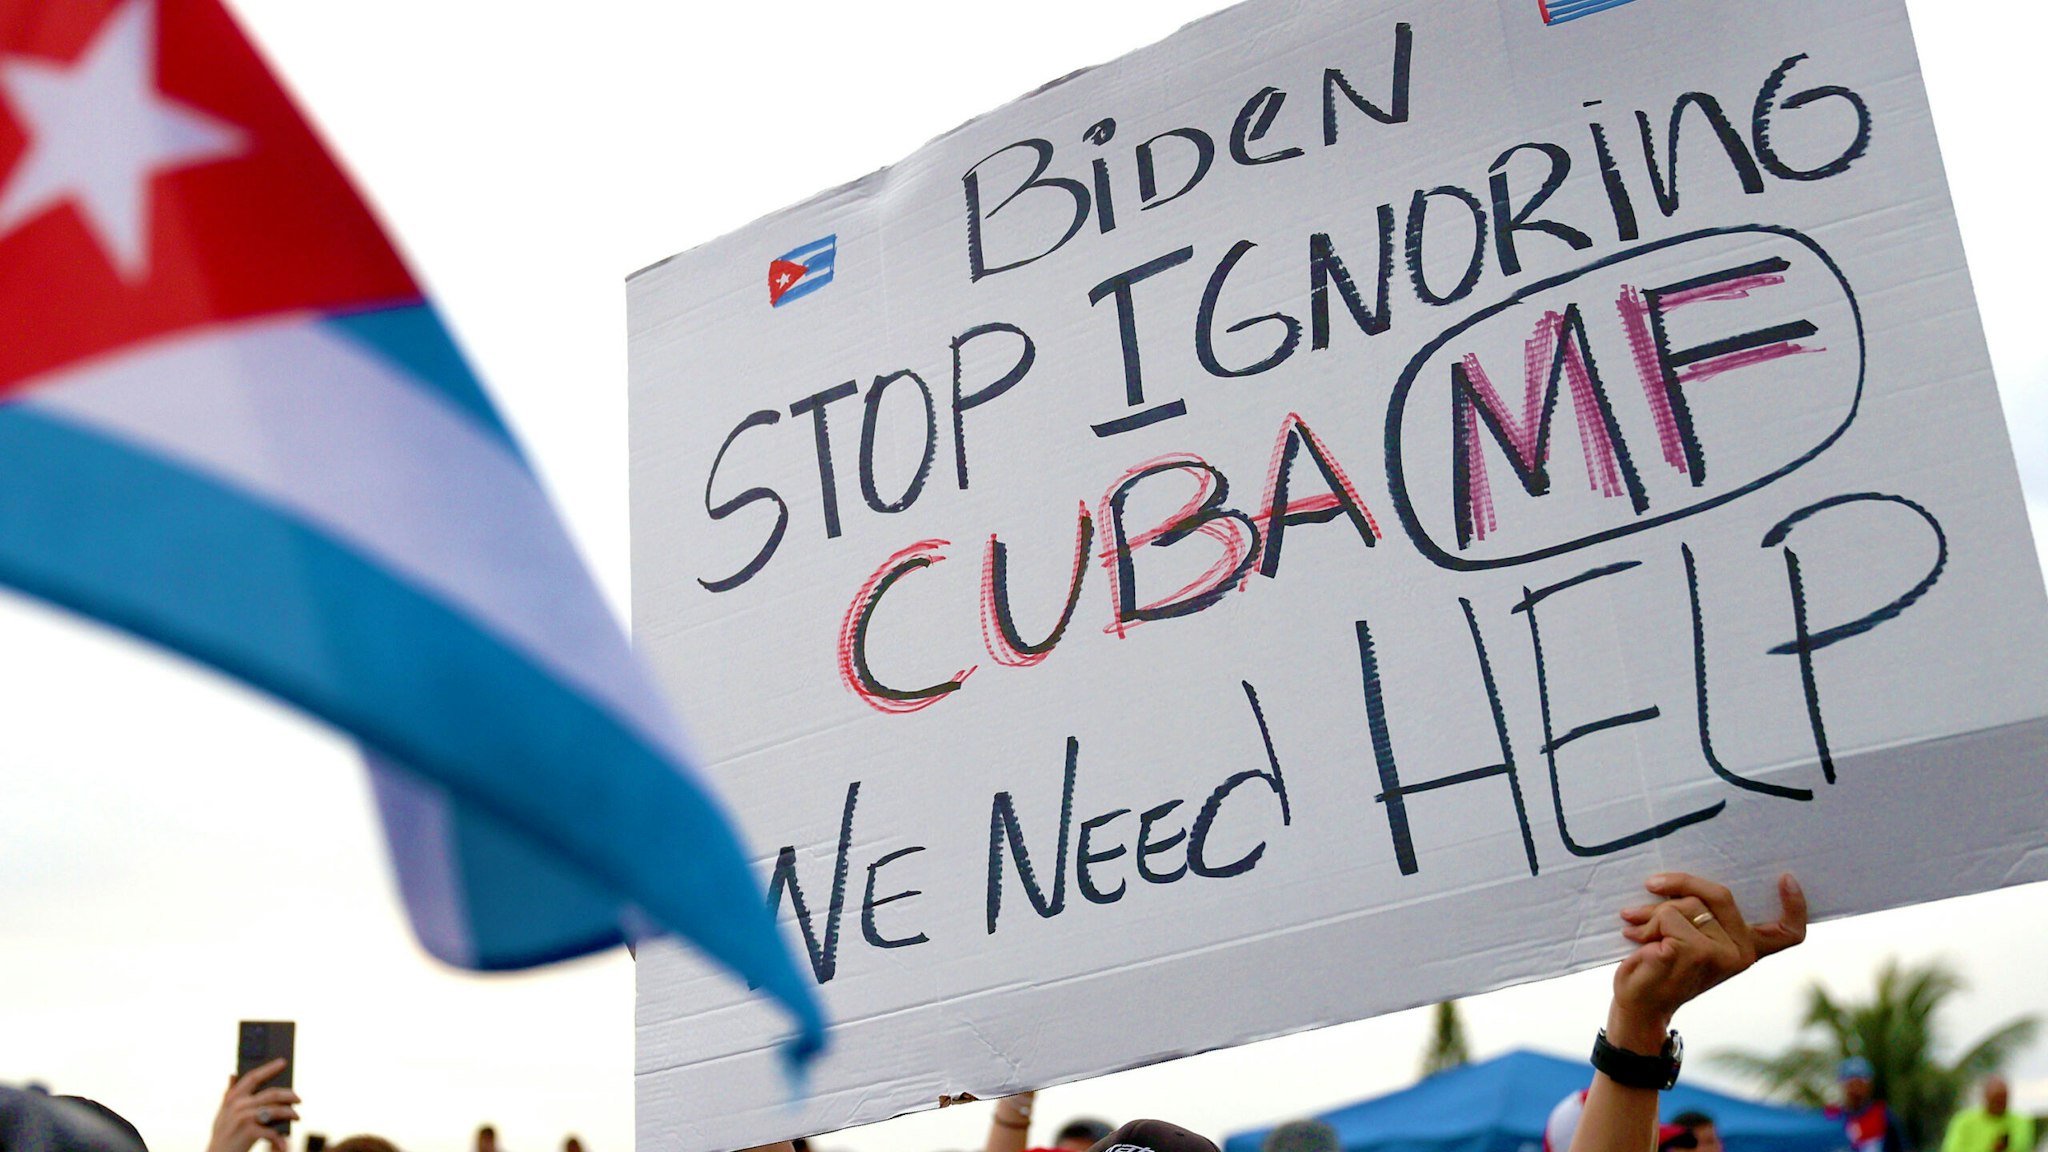 MIAMI, FLORIDA - JULY 13: Protesters shut down part of the Palmetto Expressway as they show their support for the people in Cuba that have taken to the streets to protest on July 13, 2021 in Miami, Florida. On Sunday, thousands of Cubans took to the streets across the country to protest pandemic restrictions, the pace of Covid-19 vaccinations and the Cuban government.